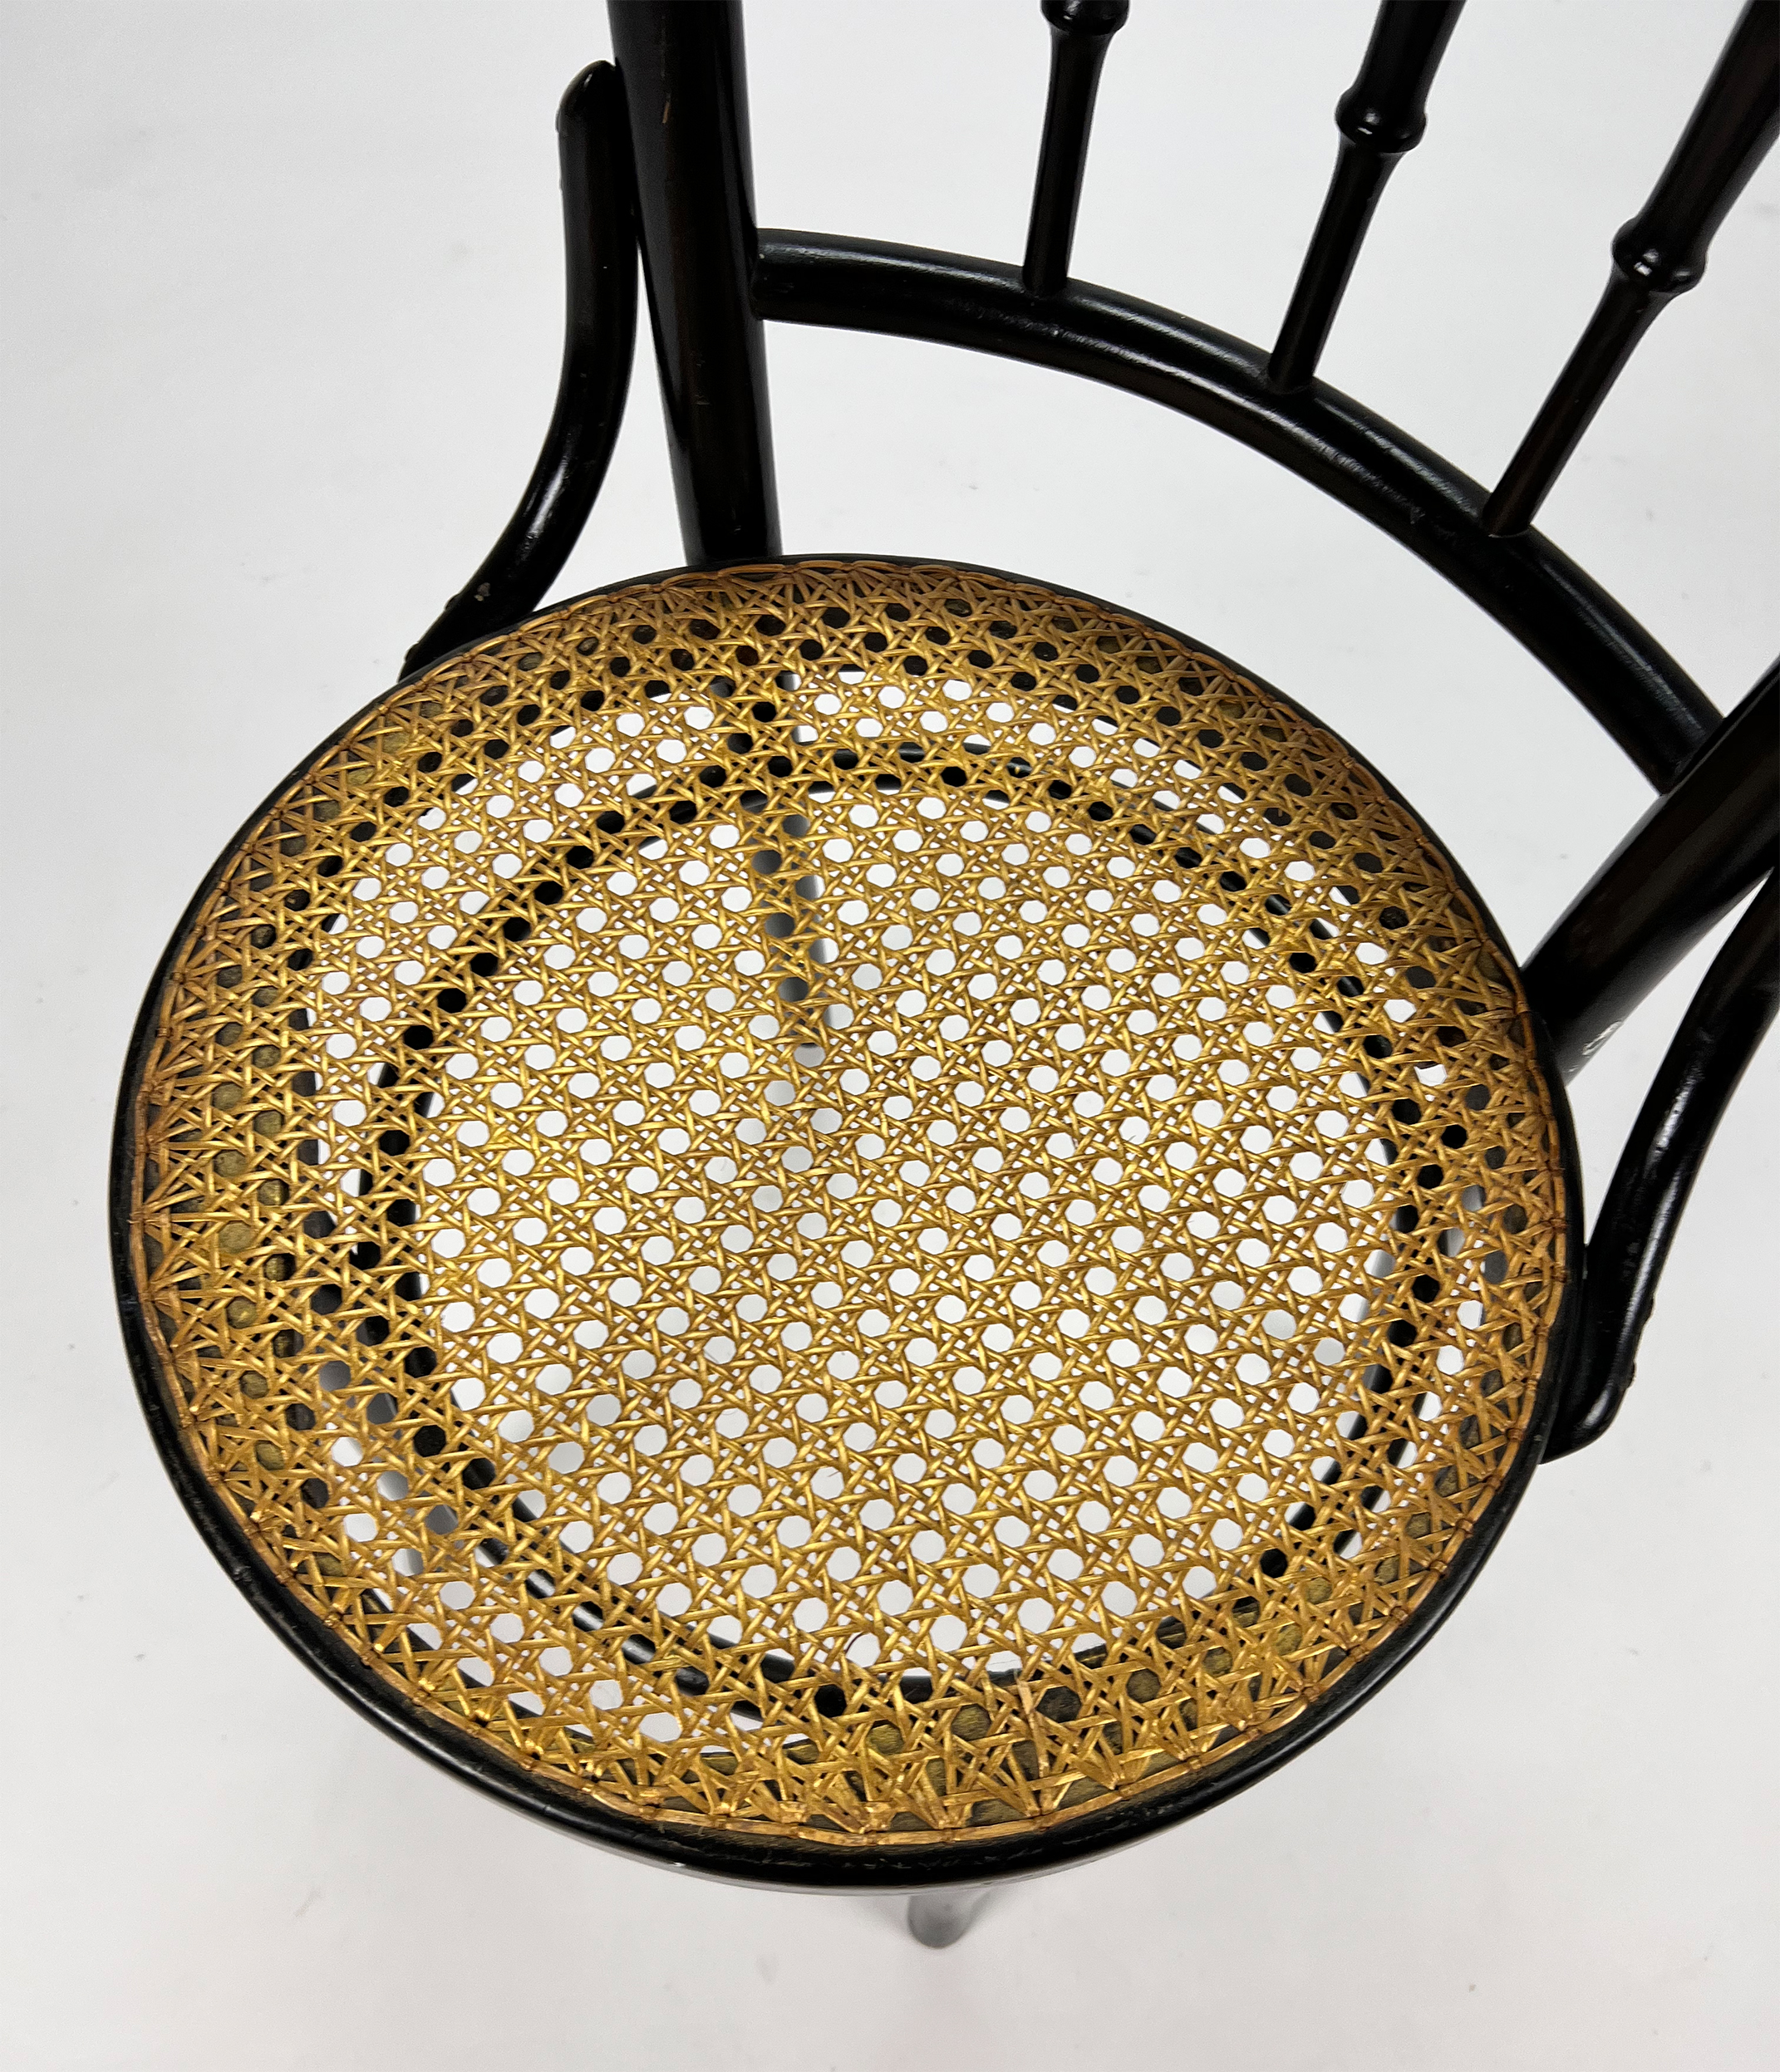 Romanian Cane and Birch Bentwood Chair, 1960s